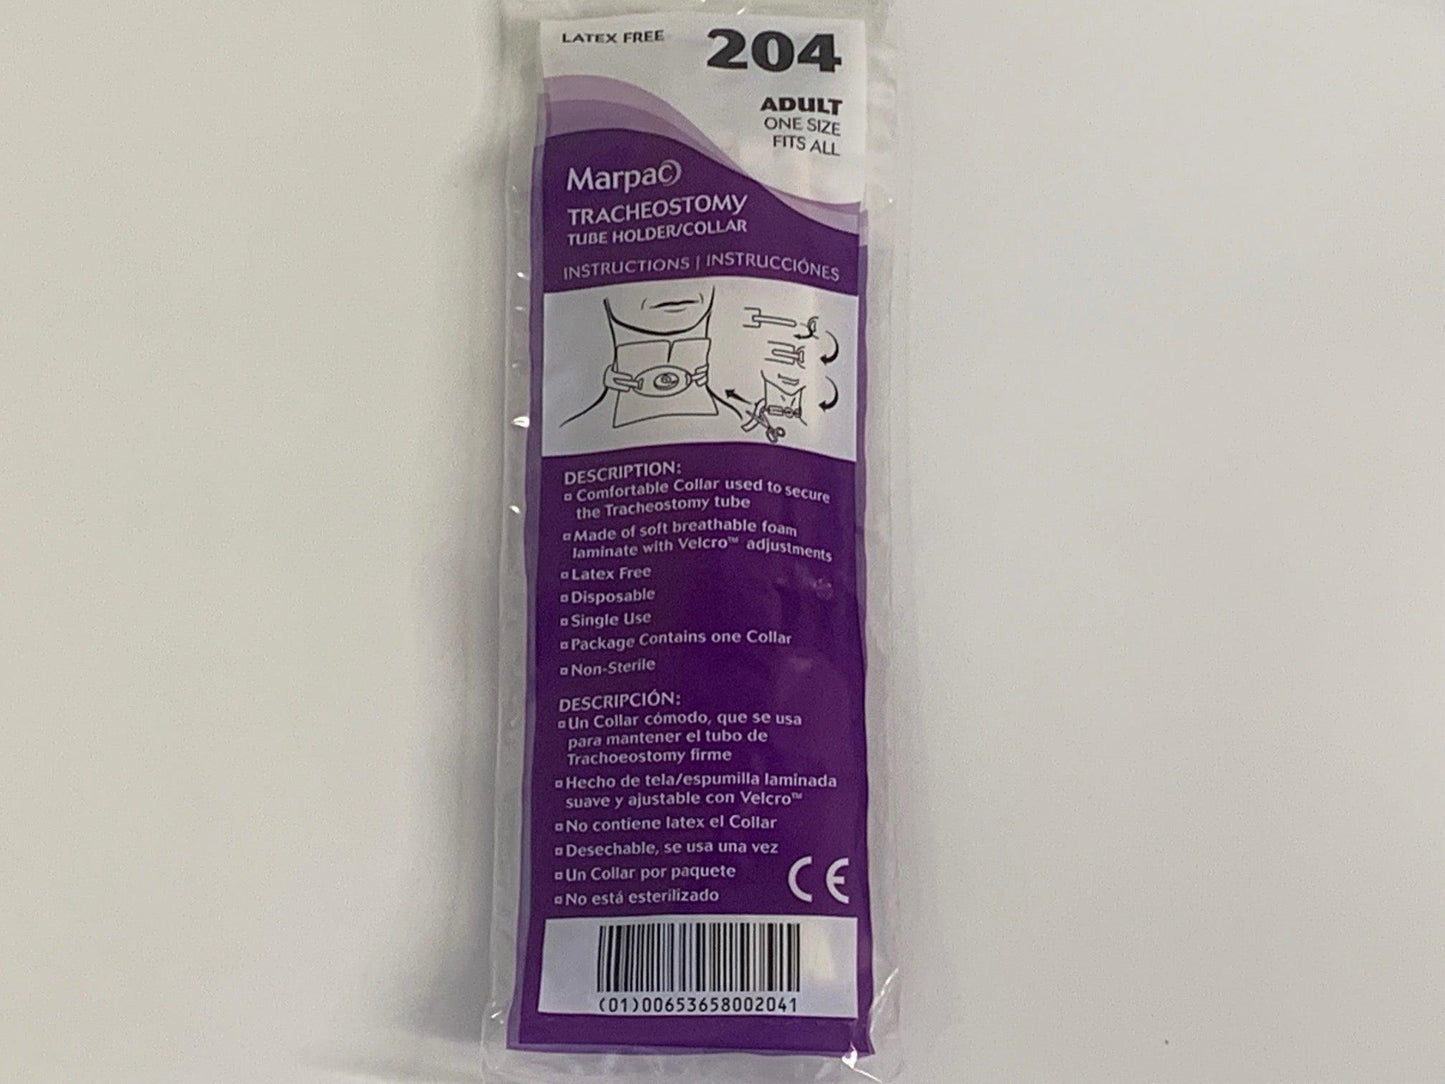 NEW 10PK Adult Marpac Tracheostomy Collar with Tube Holder Ref PN 204D - MBR Medicals